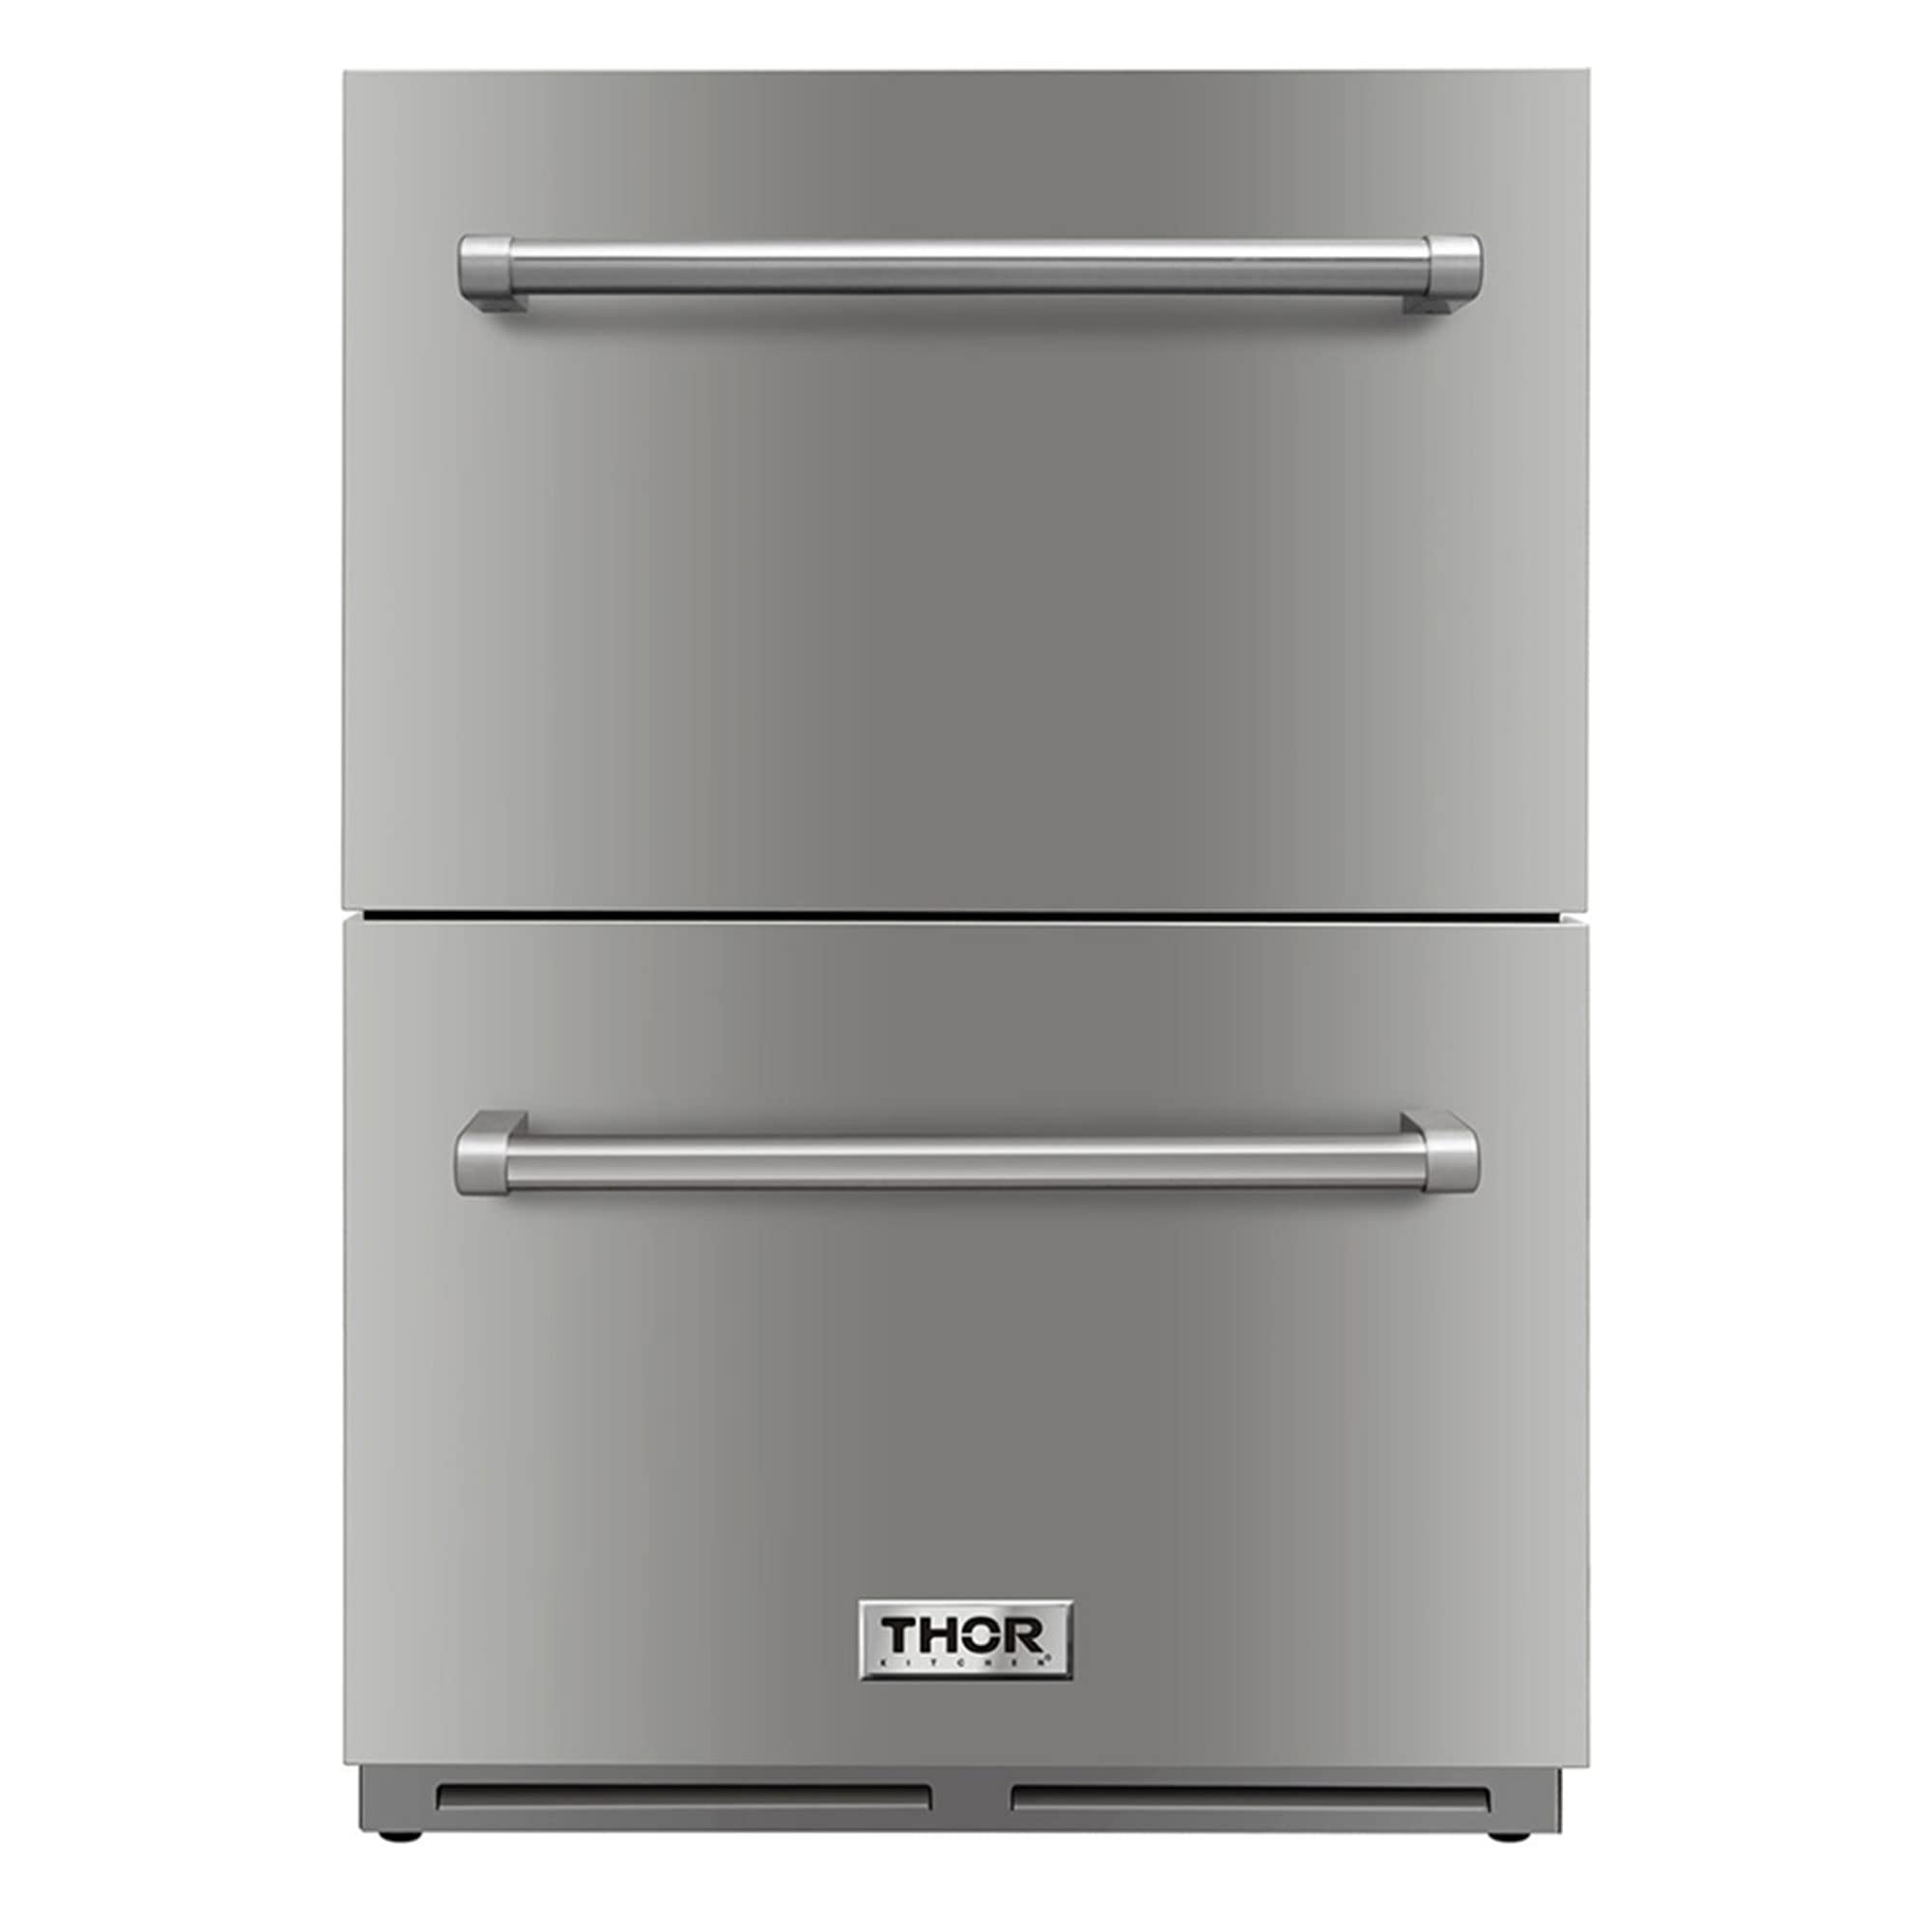 Thor Kitchen TRF2401U 5.4 Cubic Foot Stainless Steel Indoor/Outdoor Built In Undercounter Double Drawer Refrigerator Ventilated Cooling Mini Fridge